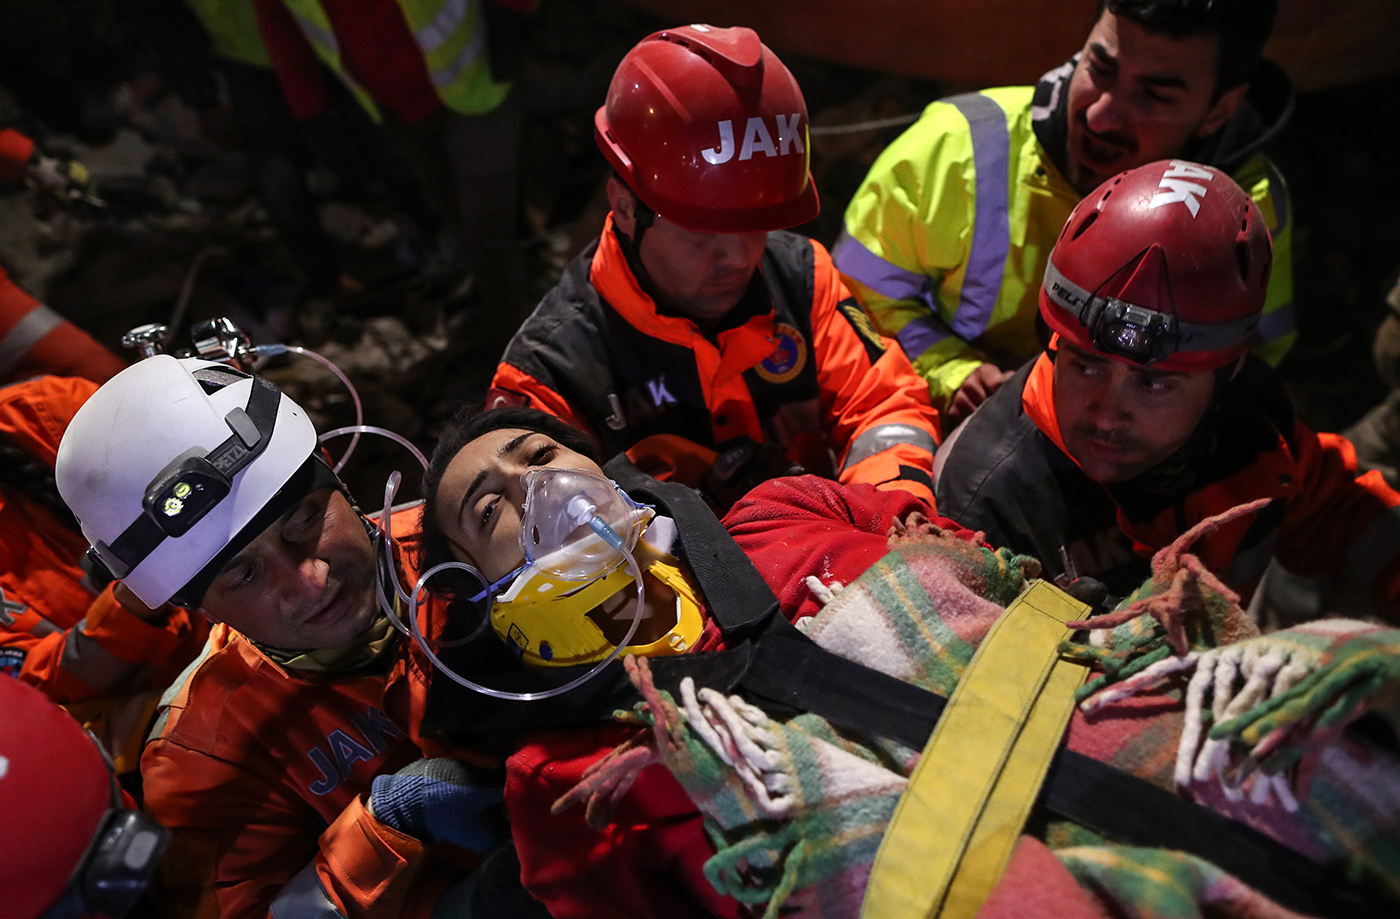 Rescue team members carry Ece Koseoglu after they evecuated her from a collapsed building after 111 hours in the aftermath of a powerful earthquake in Hatay, Turkey, 10 February 2023. More than 21,000 people have died and thousands more are injured after two major earthquakes struck southern Turkey and northern Syria on 06 February. Authorities fear the death toll will keep climbing as rescuers look for survivors across the region.